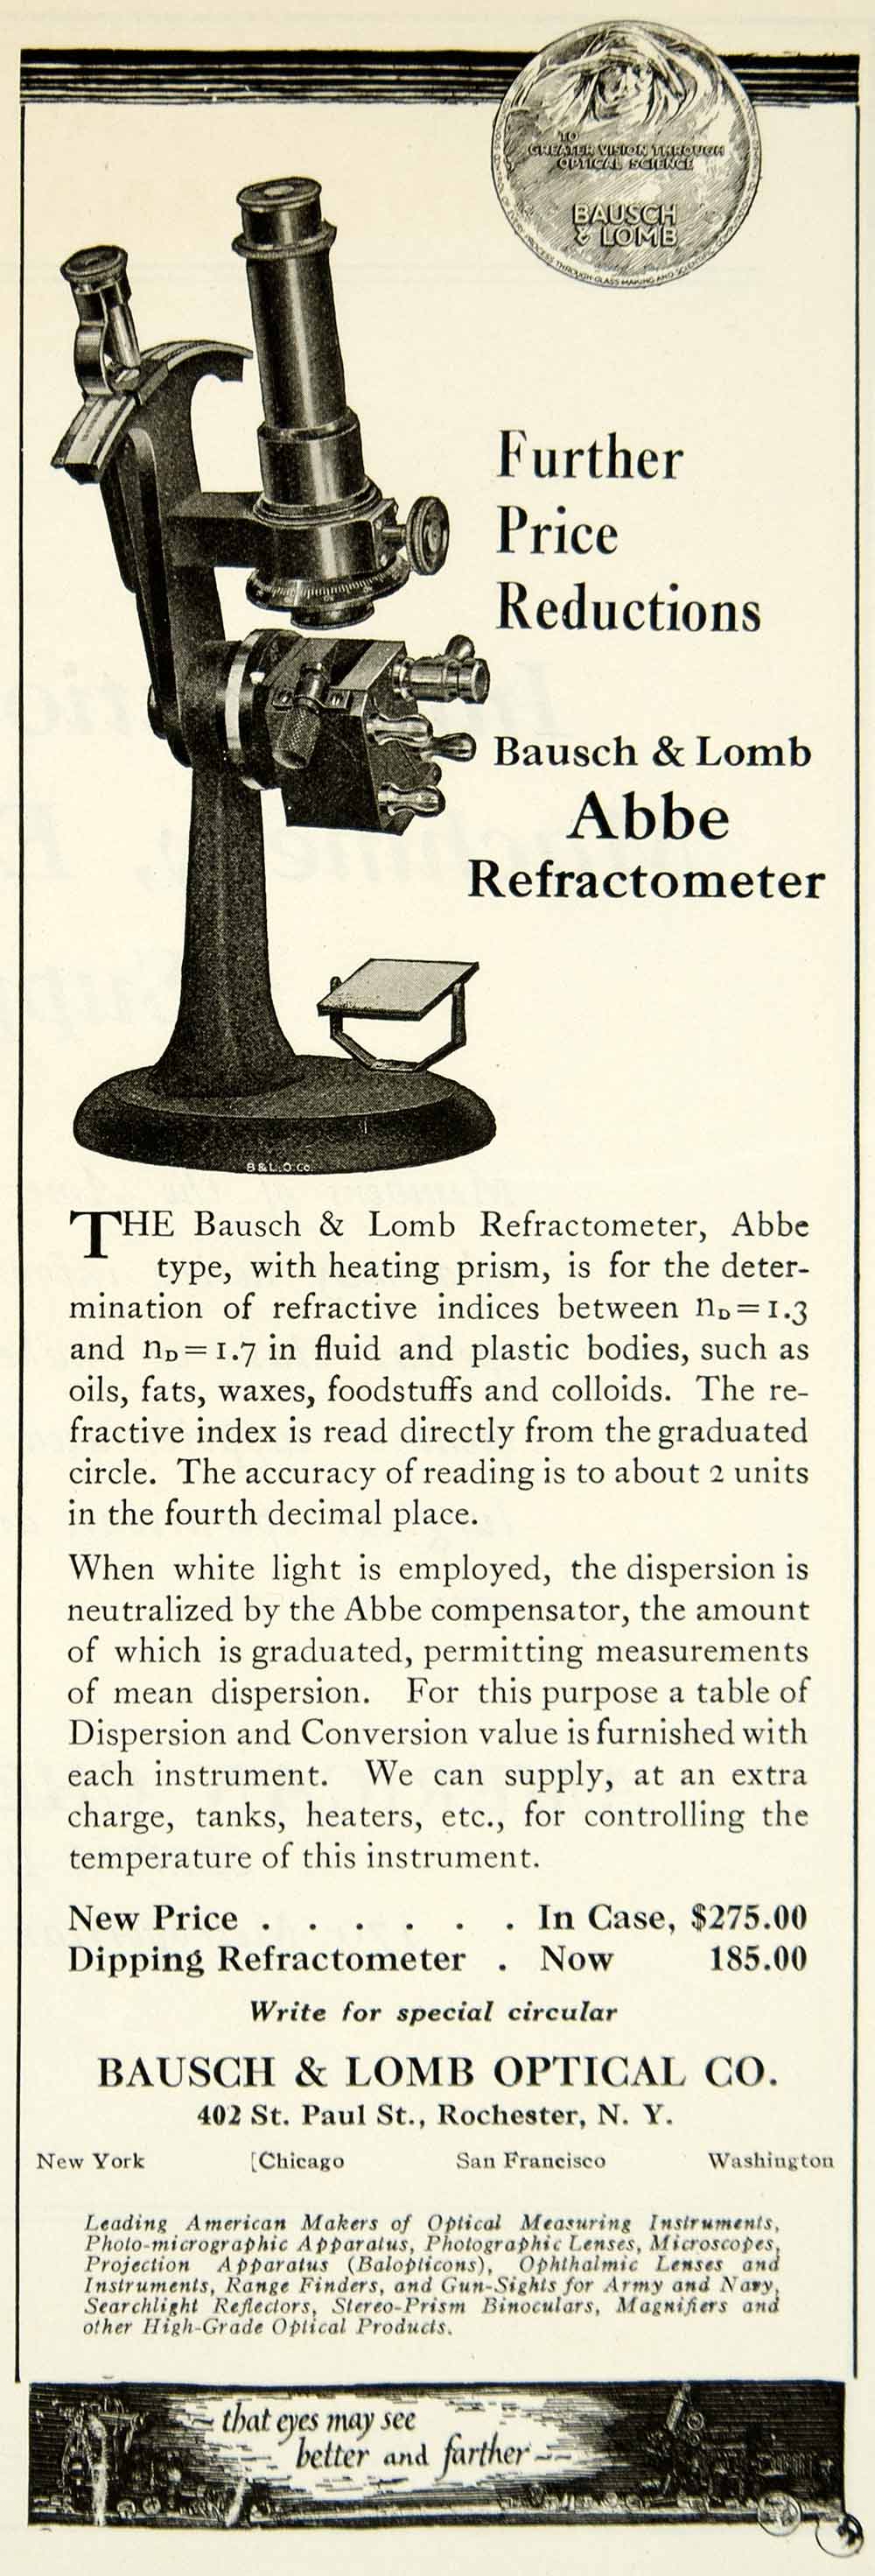 Taylor Instruments Thermometers and Weather Instruments Print Advertisement  1937